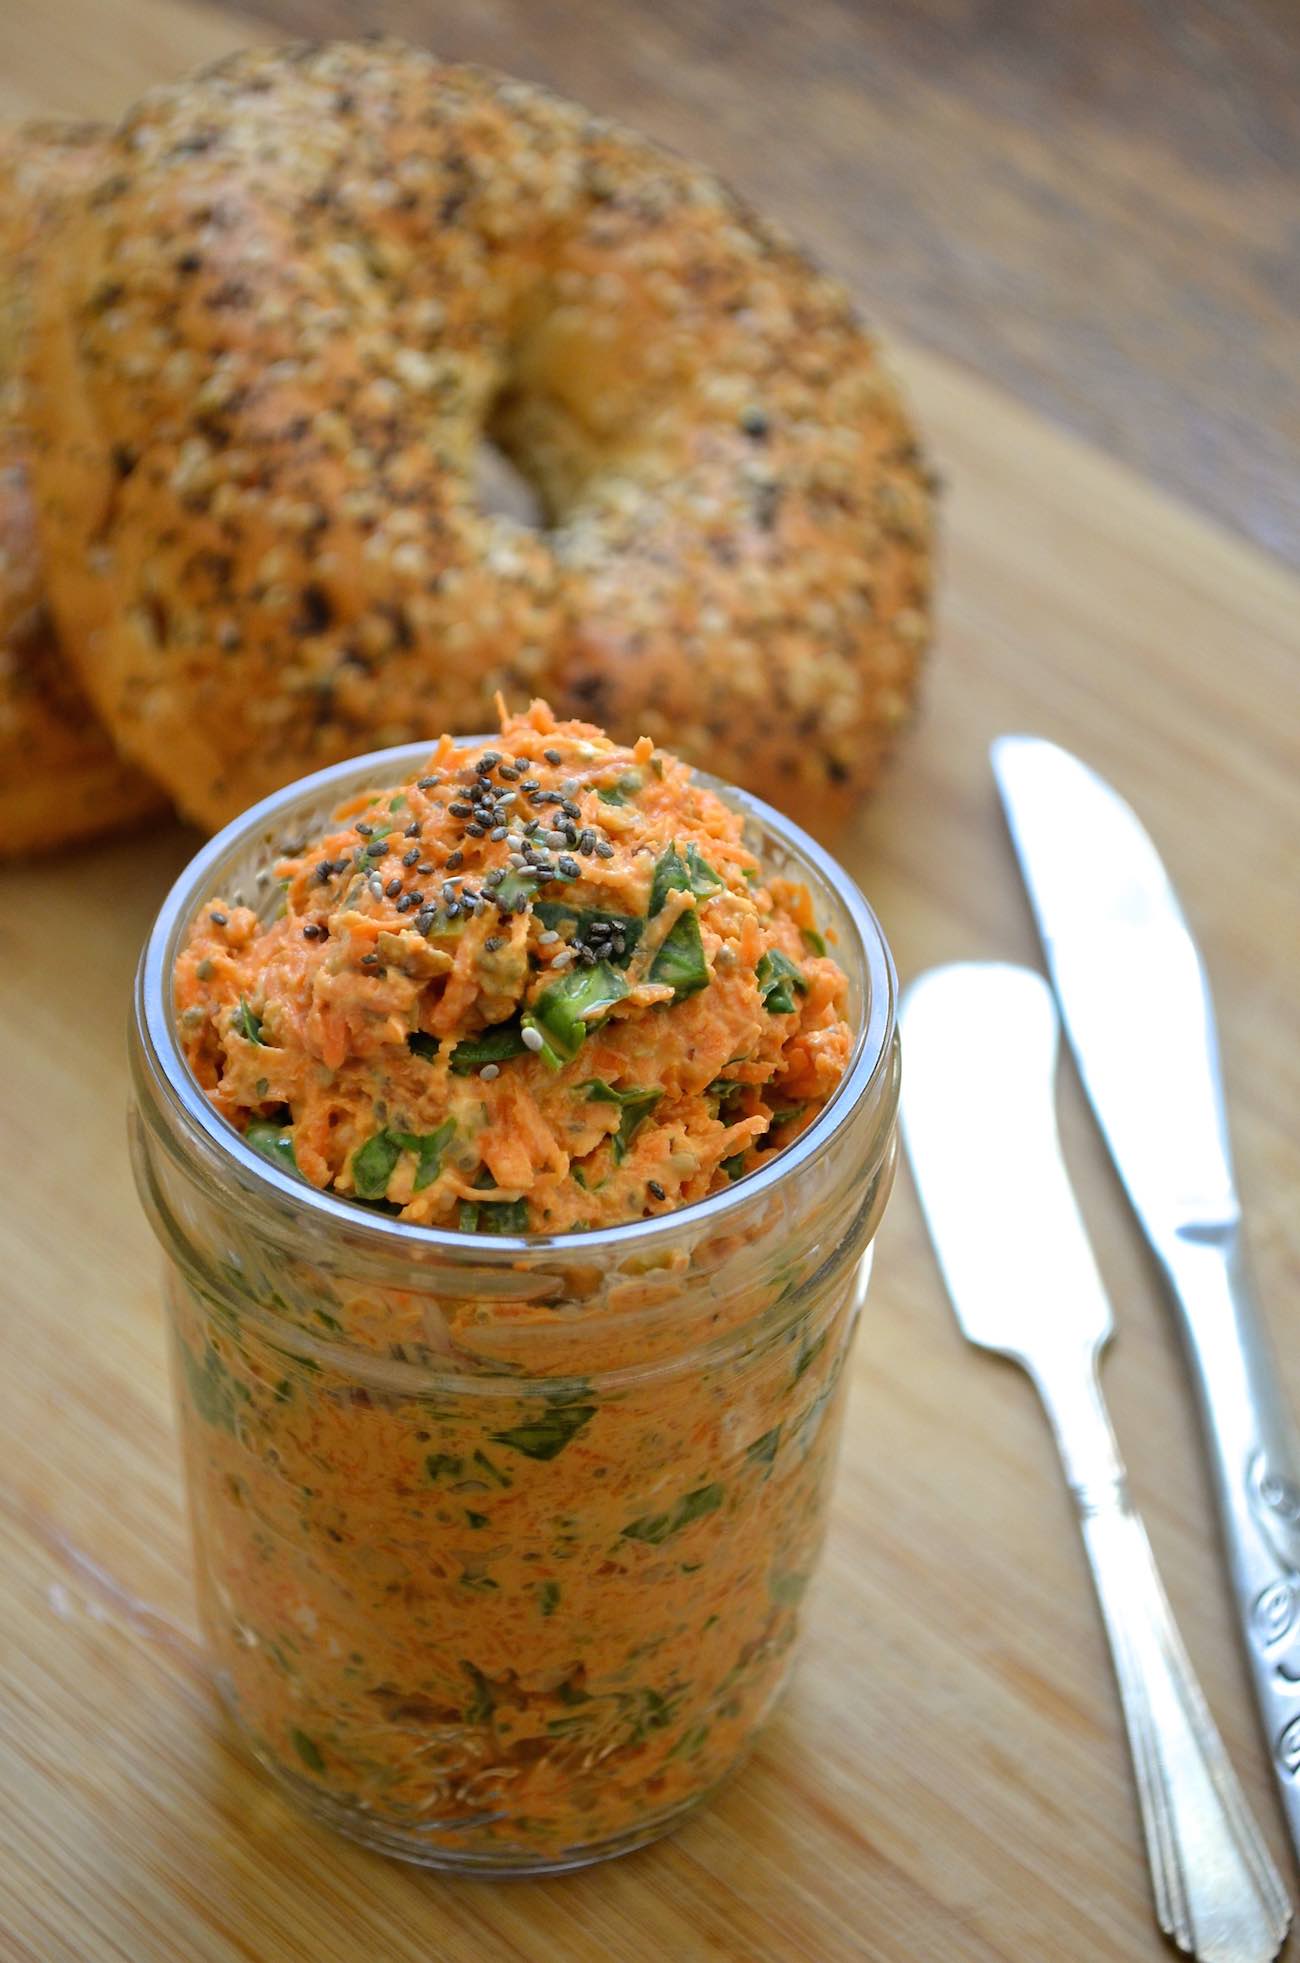 Savory Carrot Olive Spinach Sandwich Spread Recipe by Archana's Kitchen